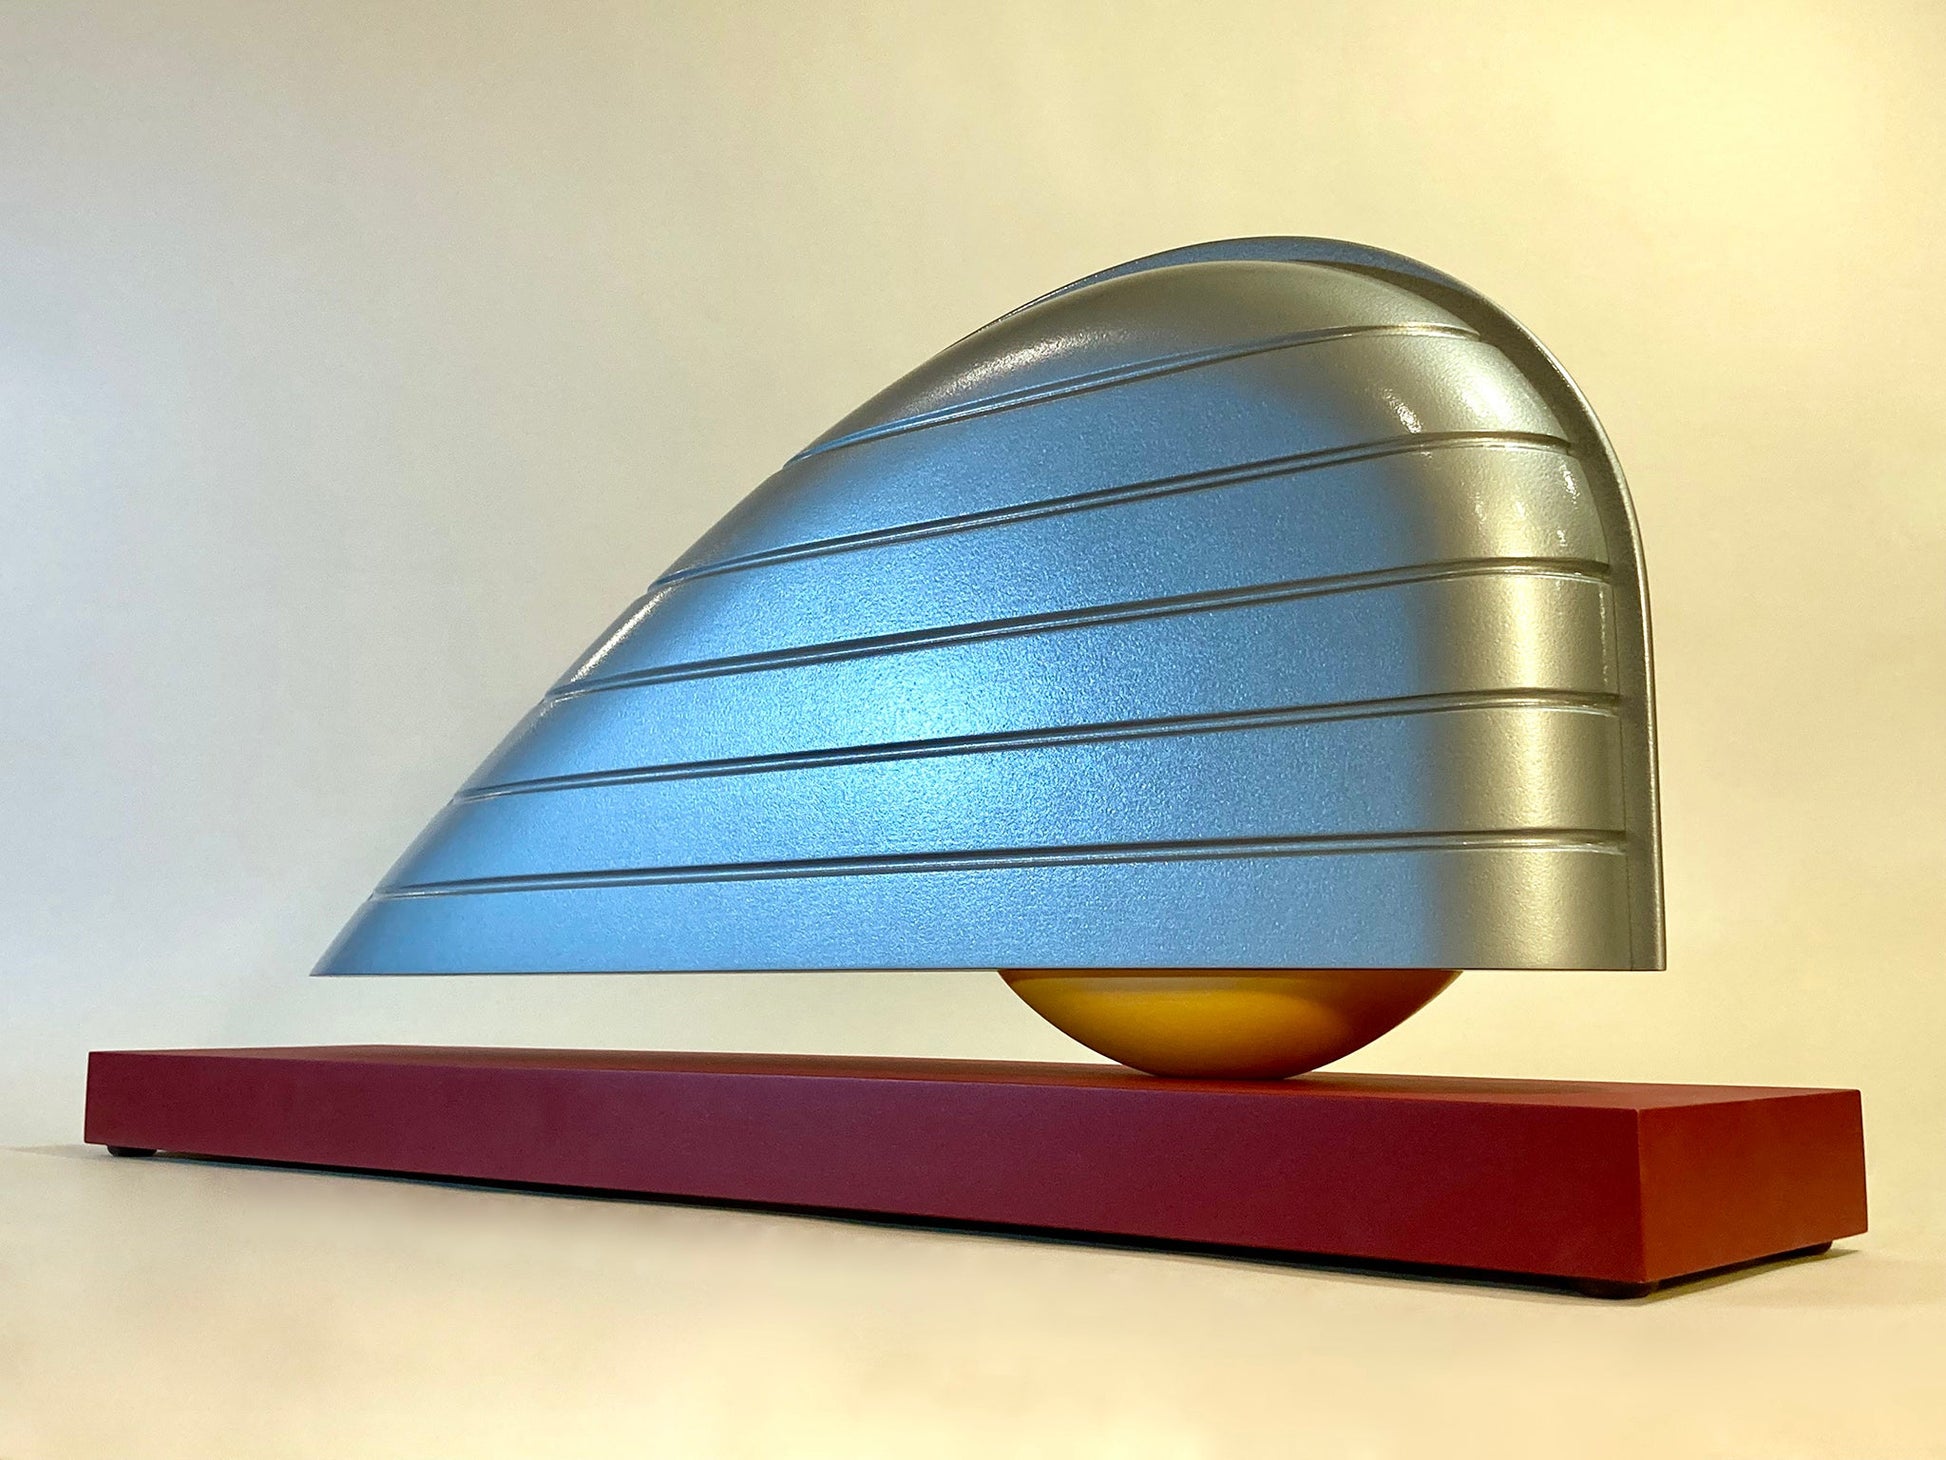 Silver shape with grooves with a yellow crescent under it resting atop a red plank of wood. 15"x34"x7" painted wood Sean O'Meallie